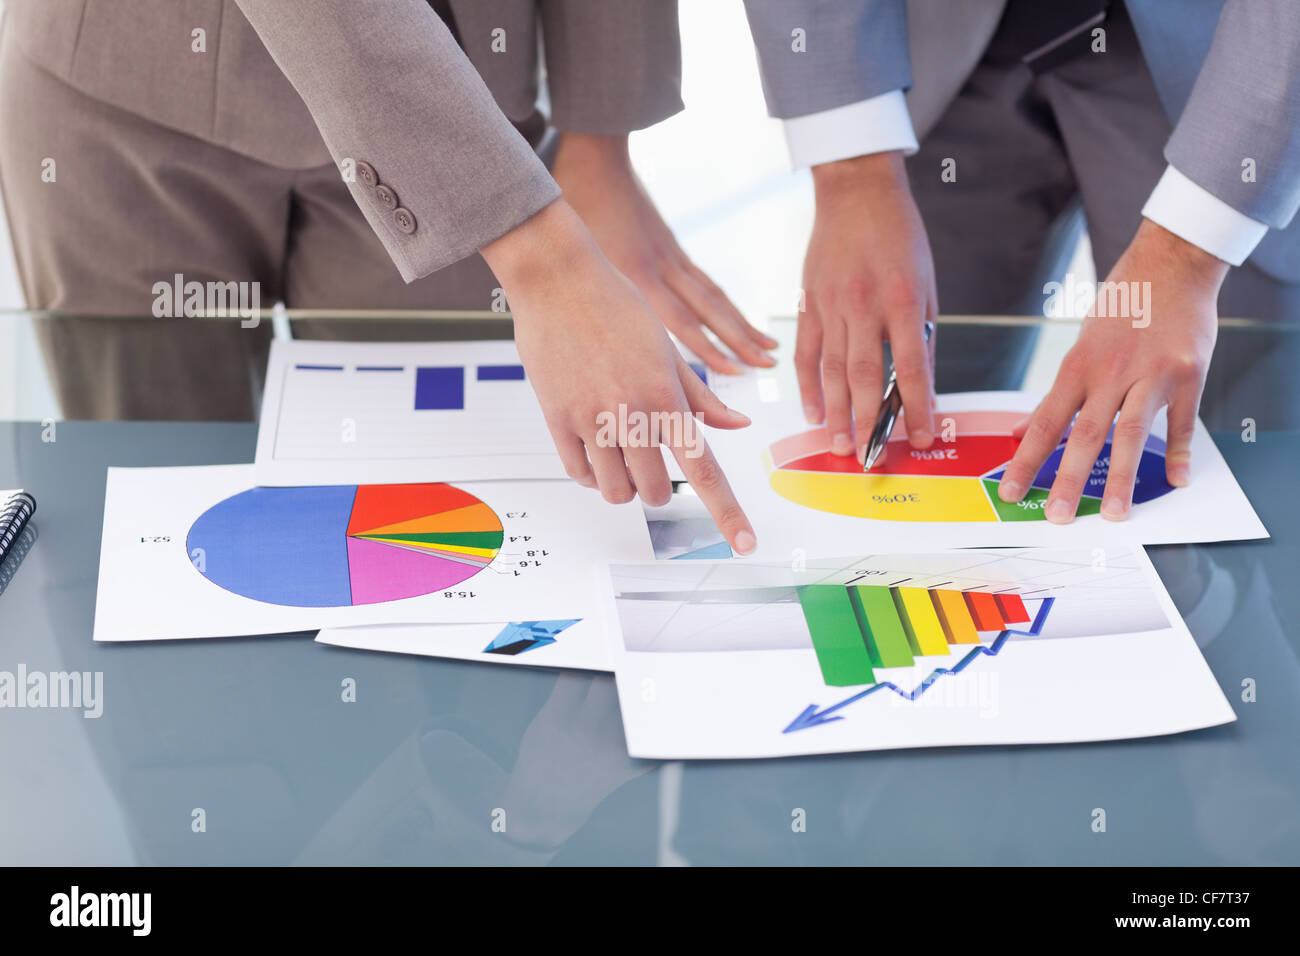 Hands of business people studying statistics Stock Photo